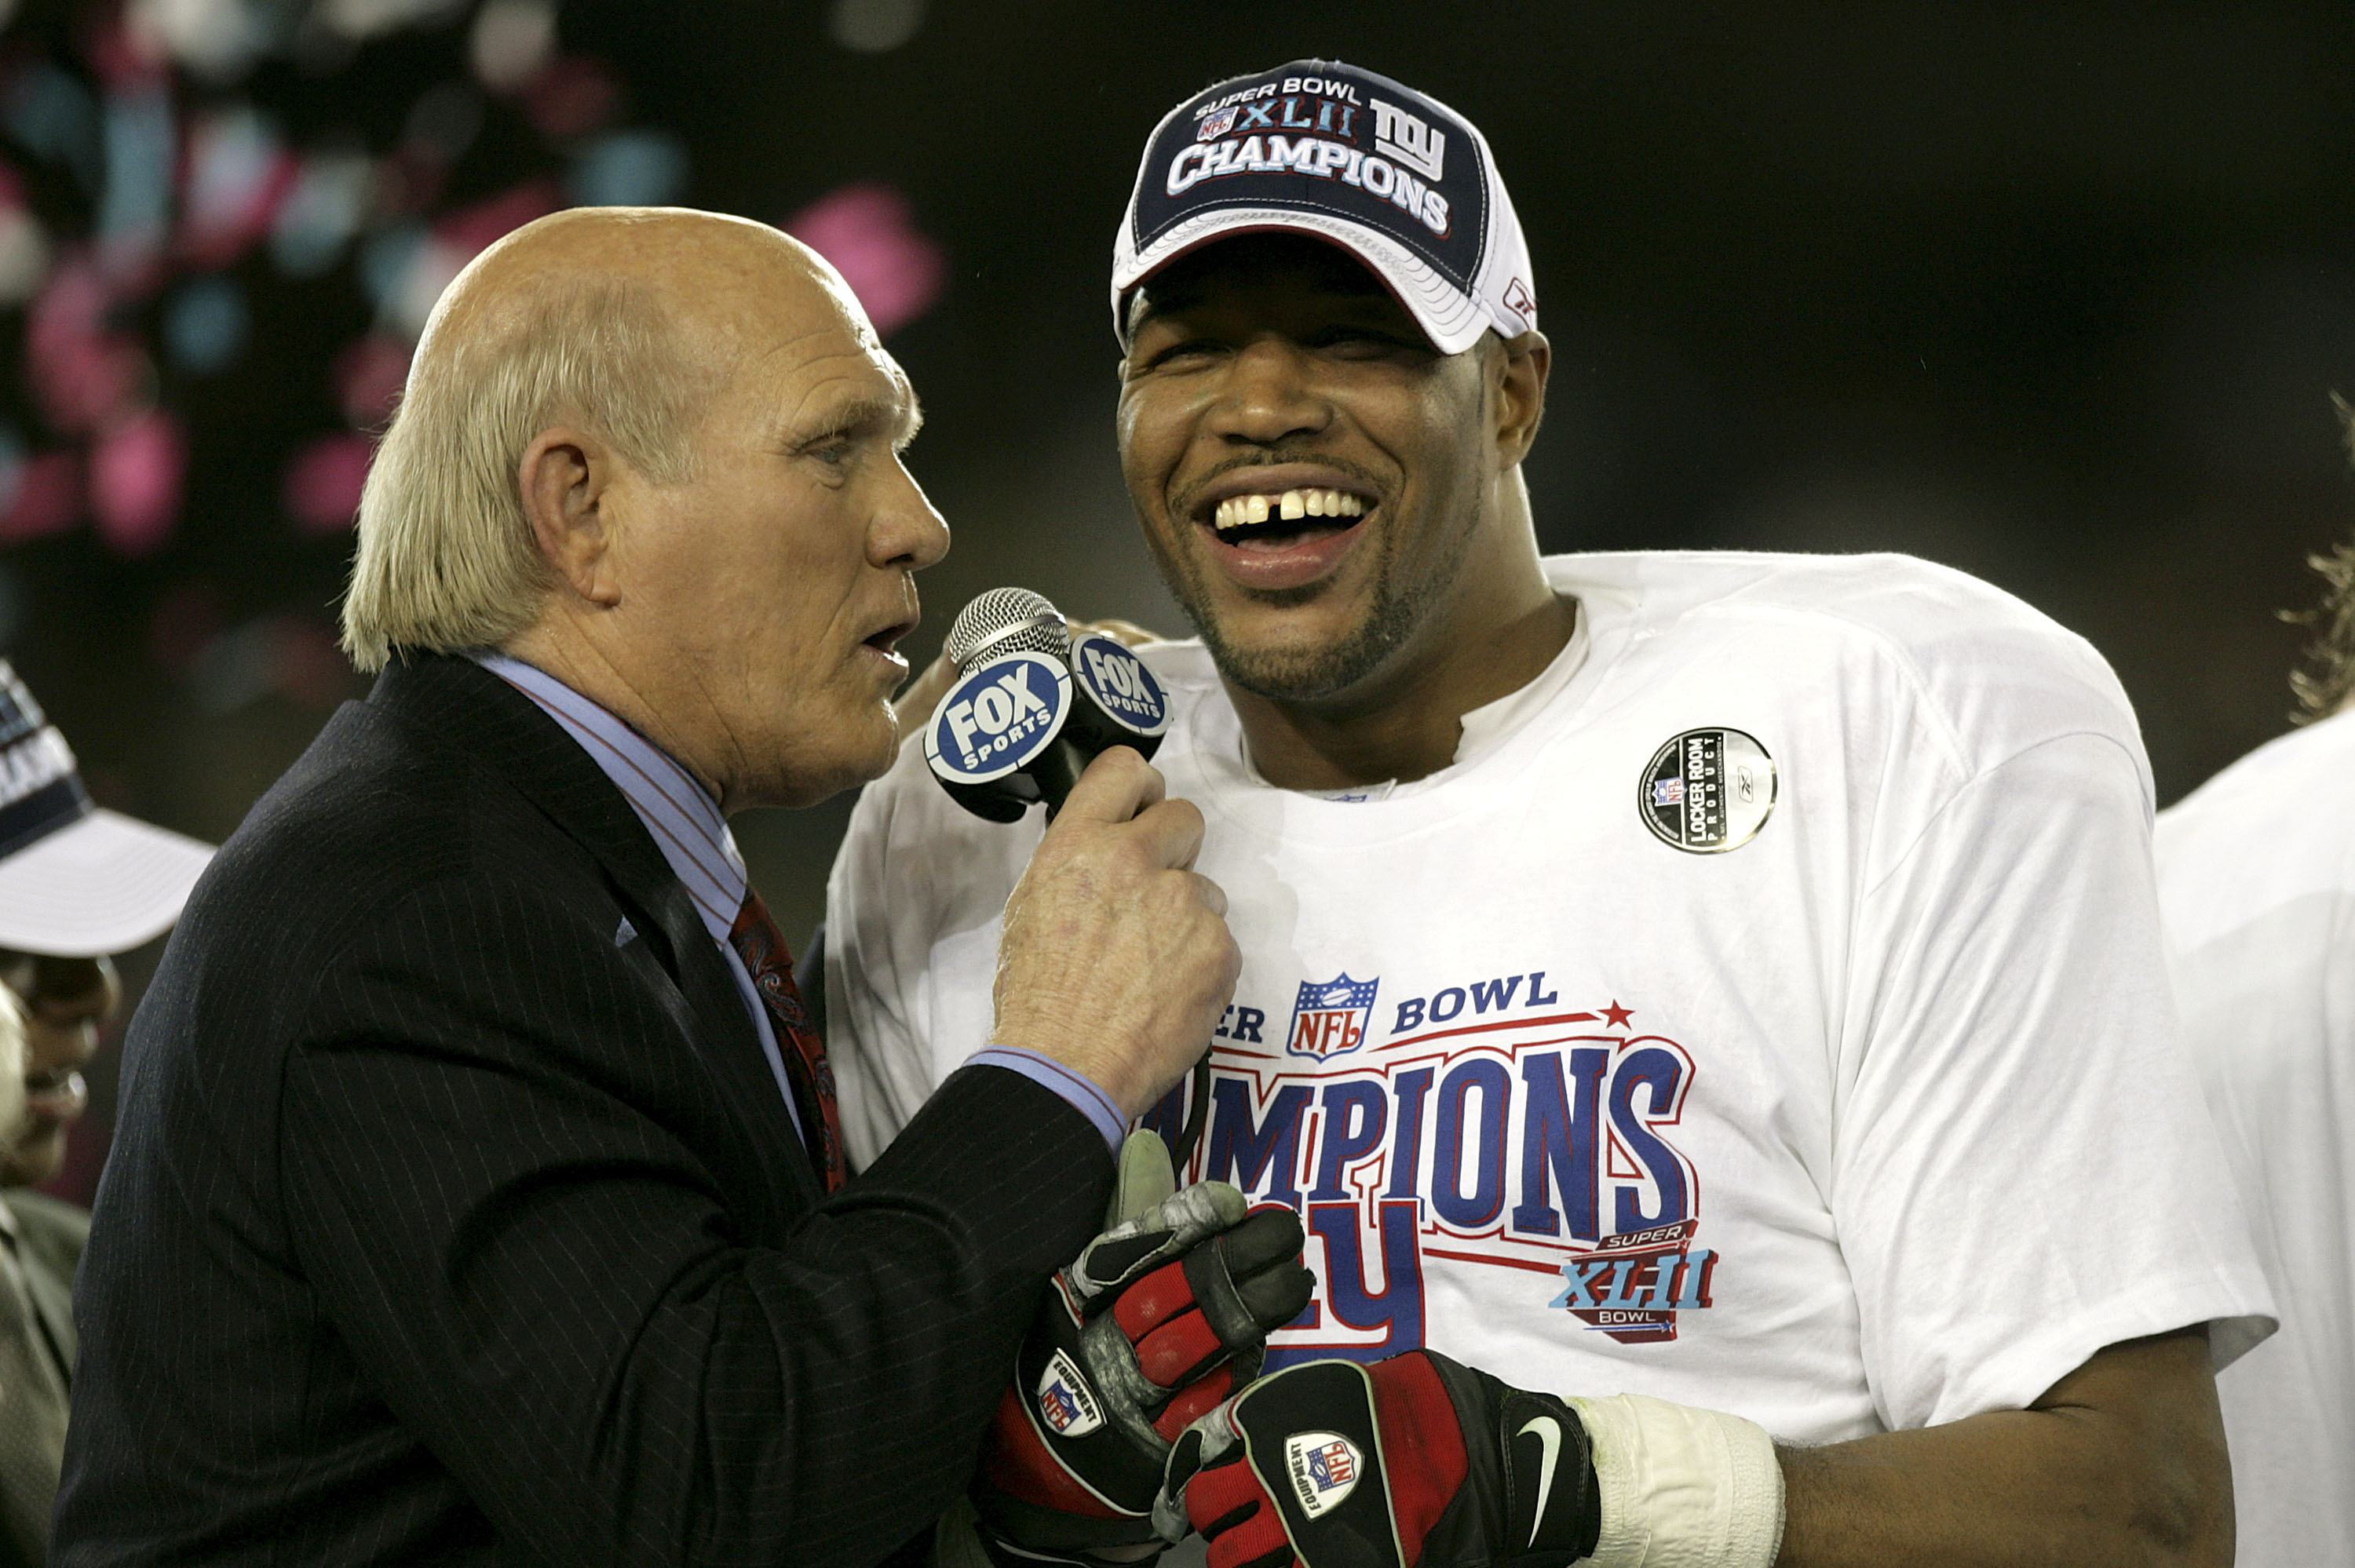 Strahan disputes authenticity of Super Bowl XLII jersey up for